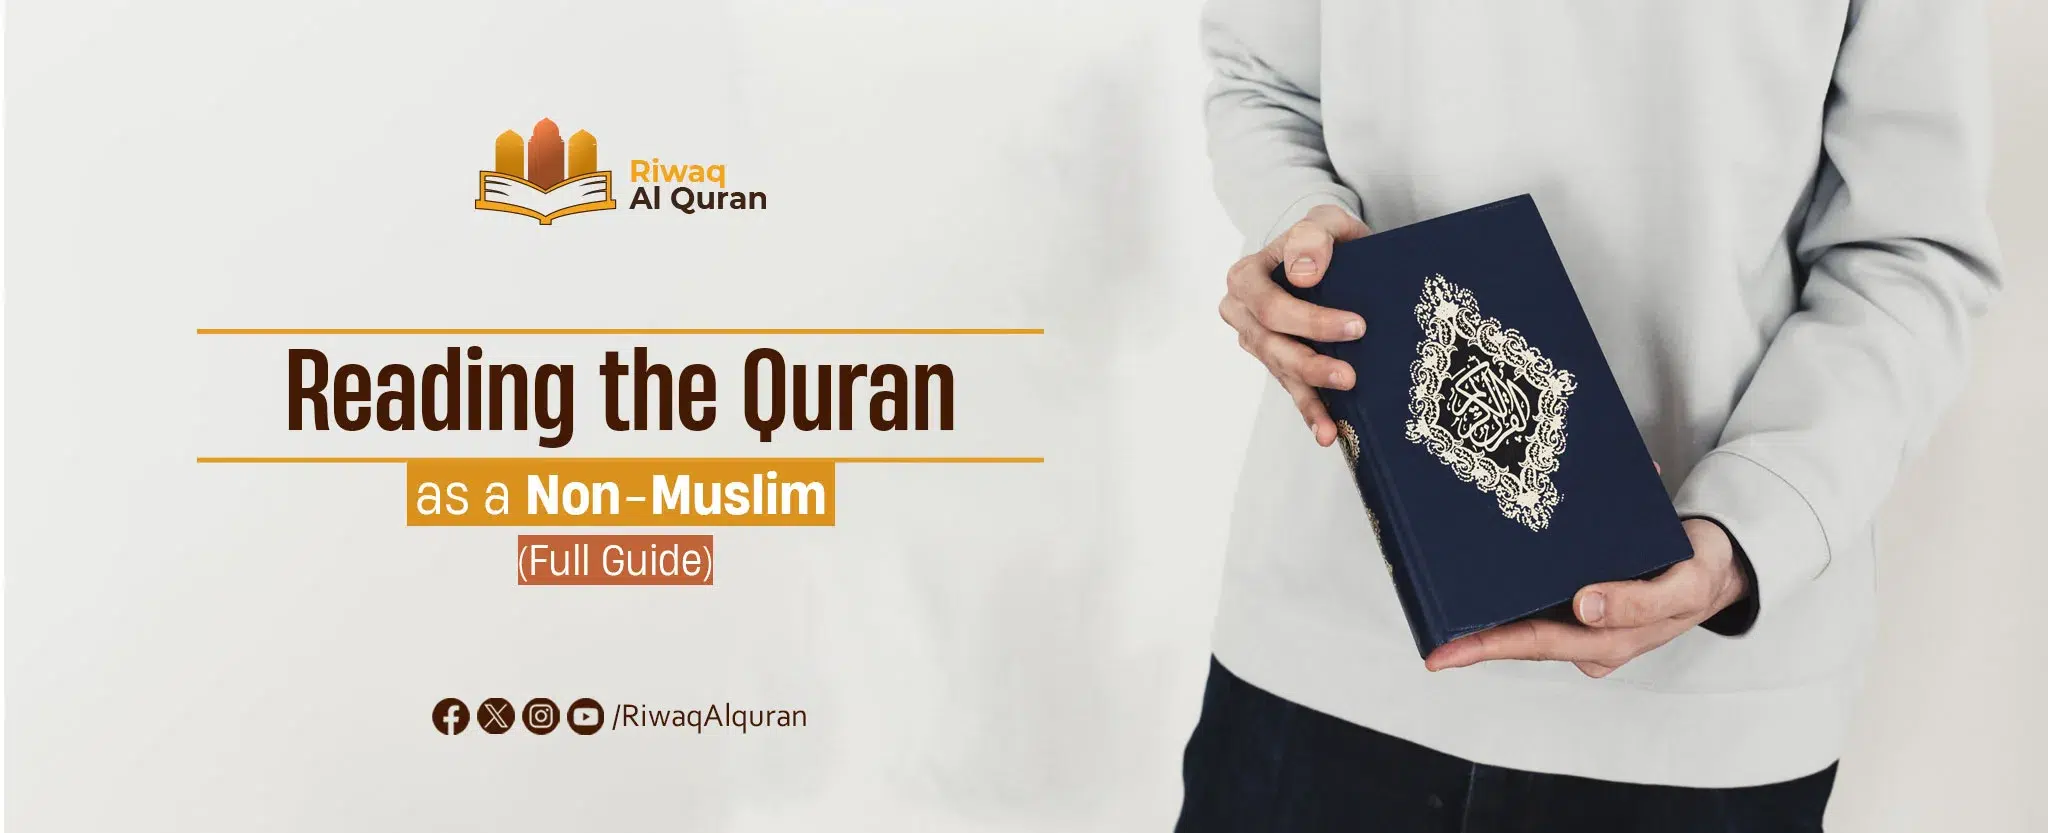 Reading the Quran as a Non-Muslim: Full Guide